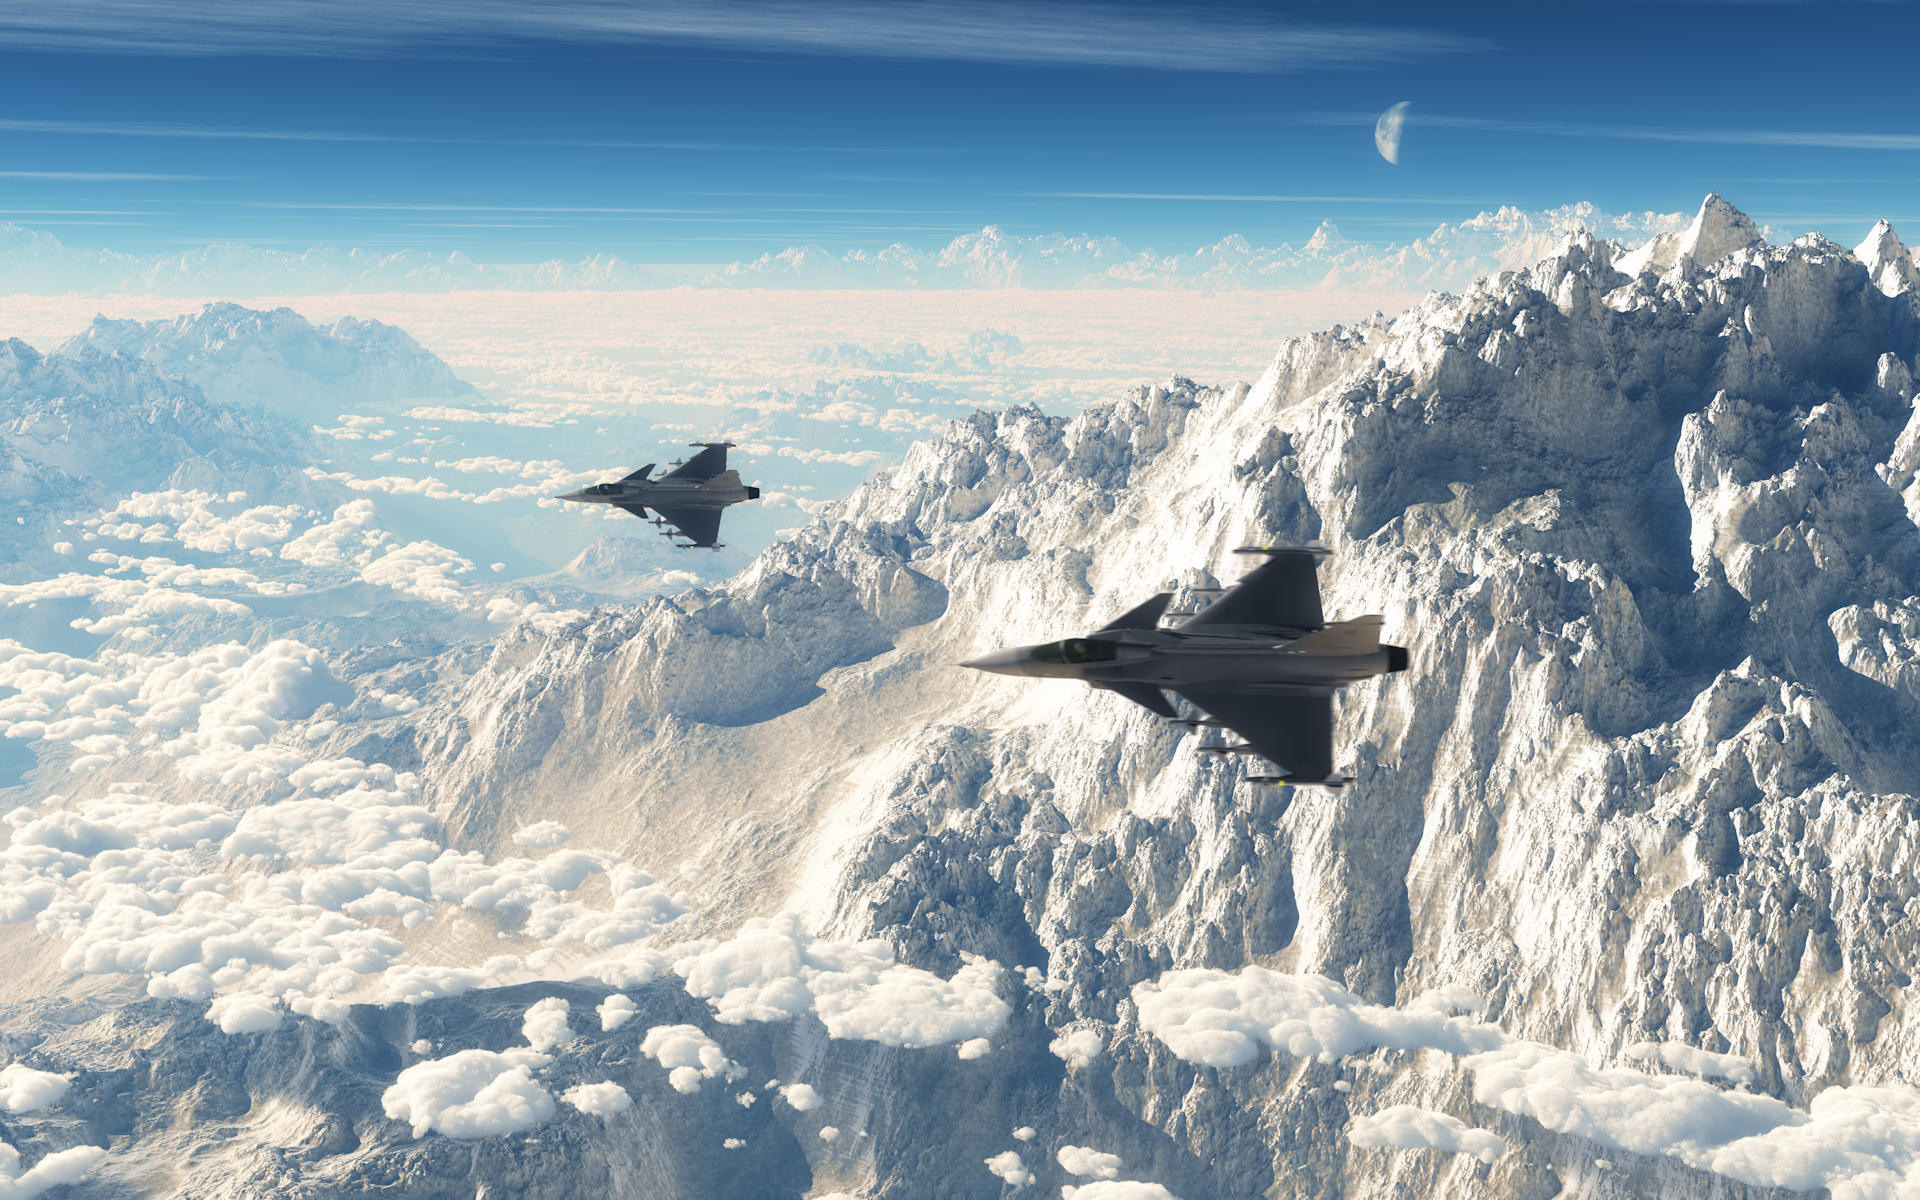 Awesome Air force and Jet Planes Wallpaper 20 pics THE JET LIFE 1920x1200